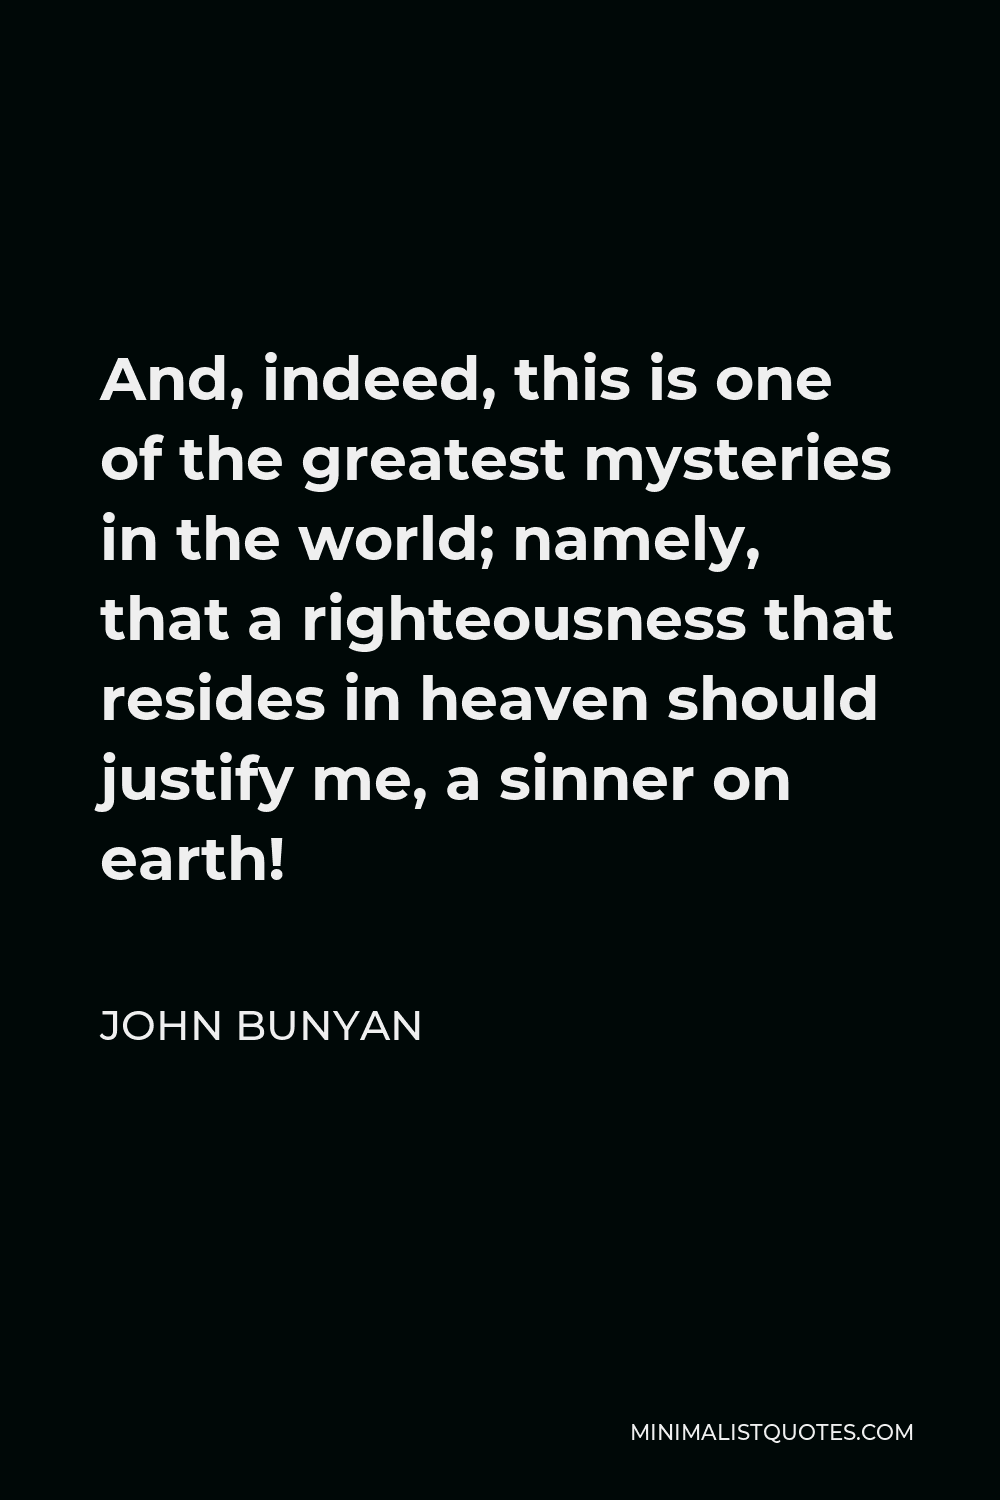 John Bunyan Quote - And, indeed, this is one of the greatest mysteries in the world; namely, that a righteousness that resides in heaven should justify me, a sinner on earth!